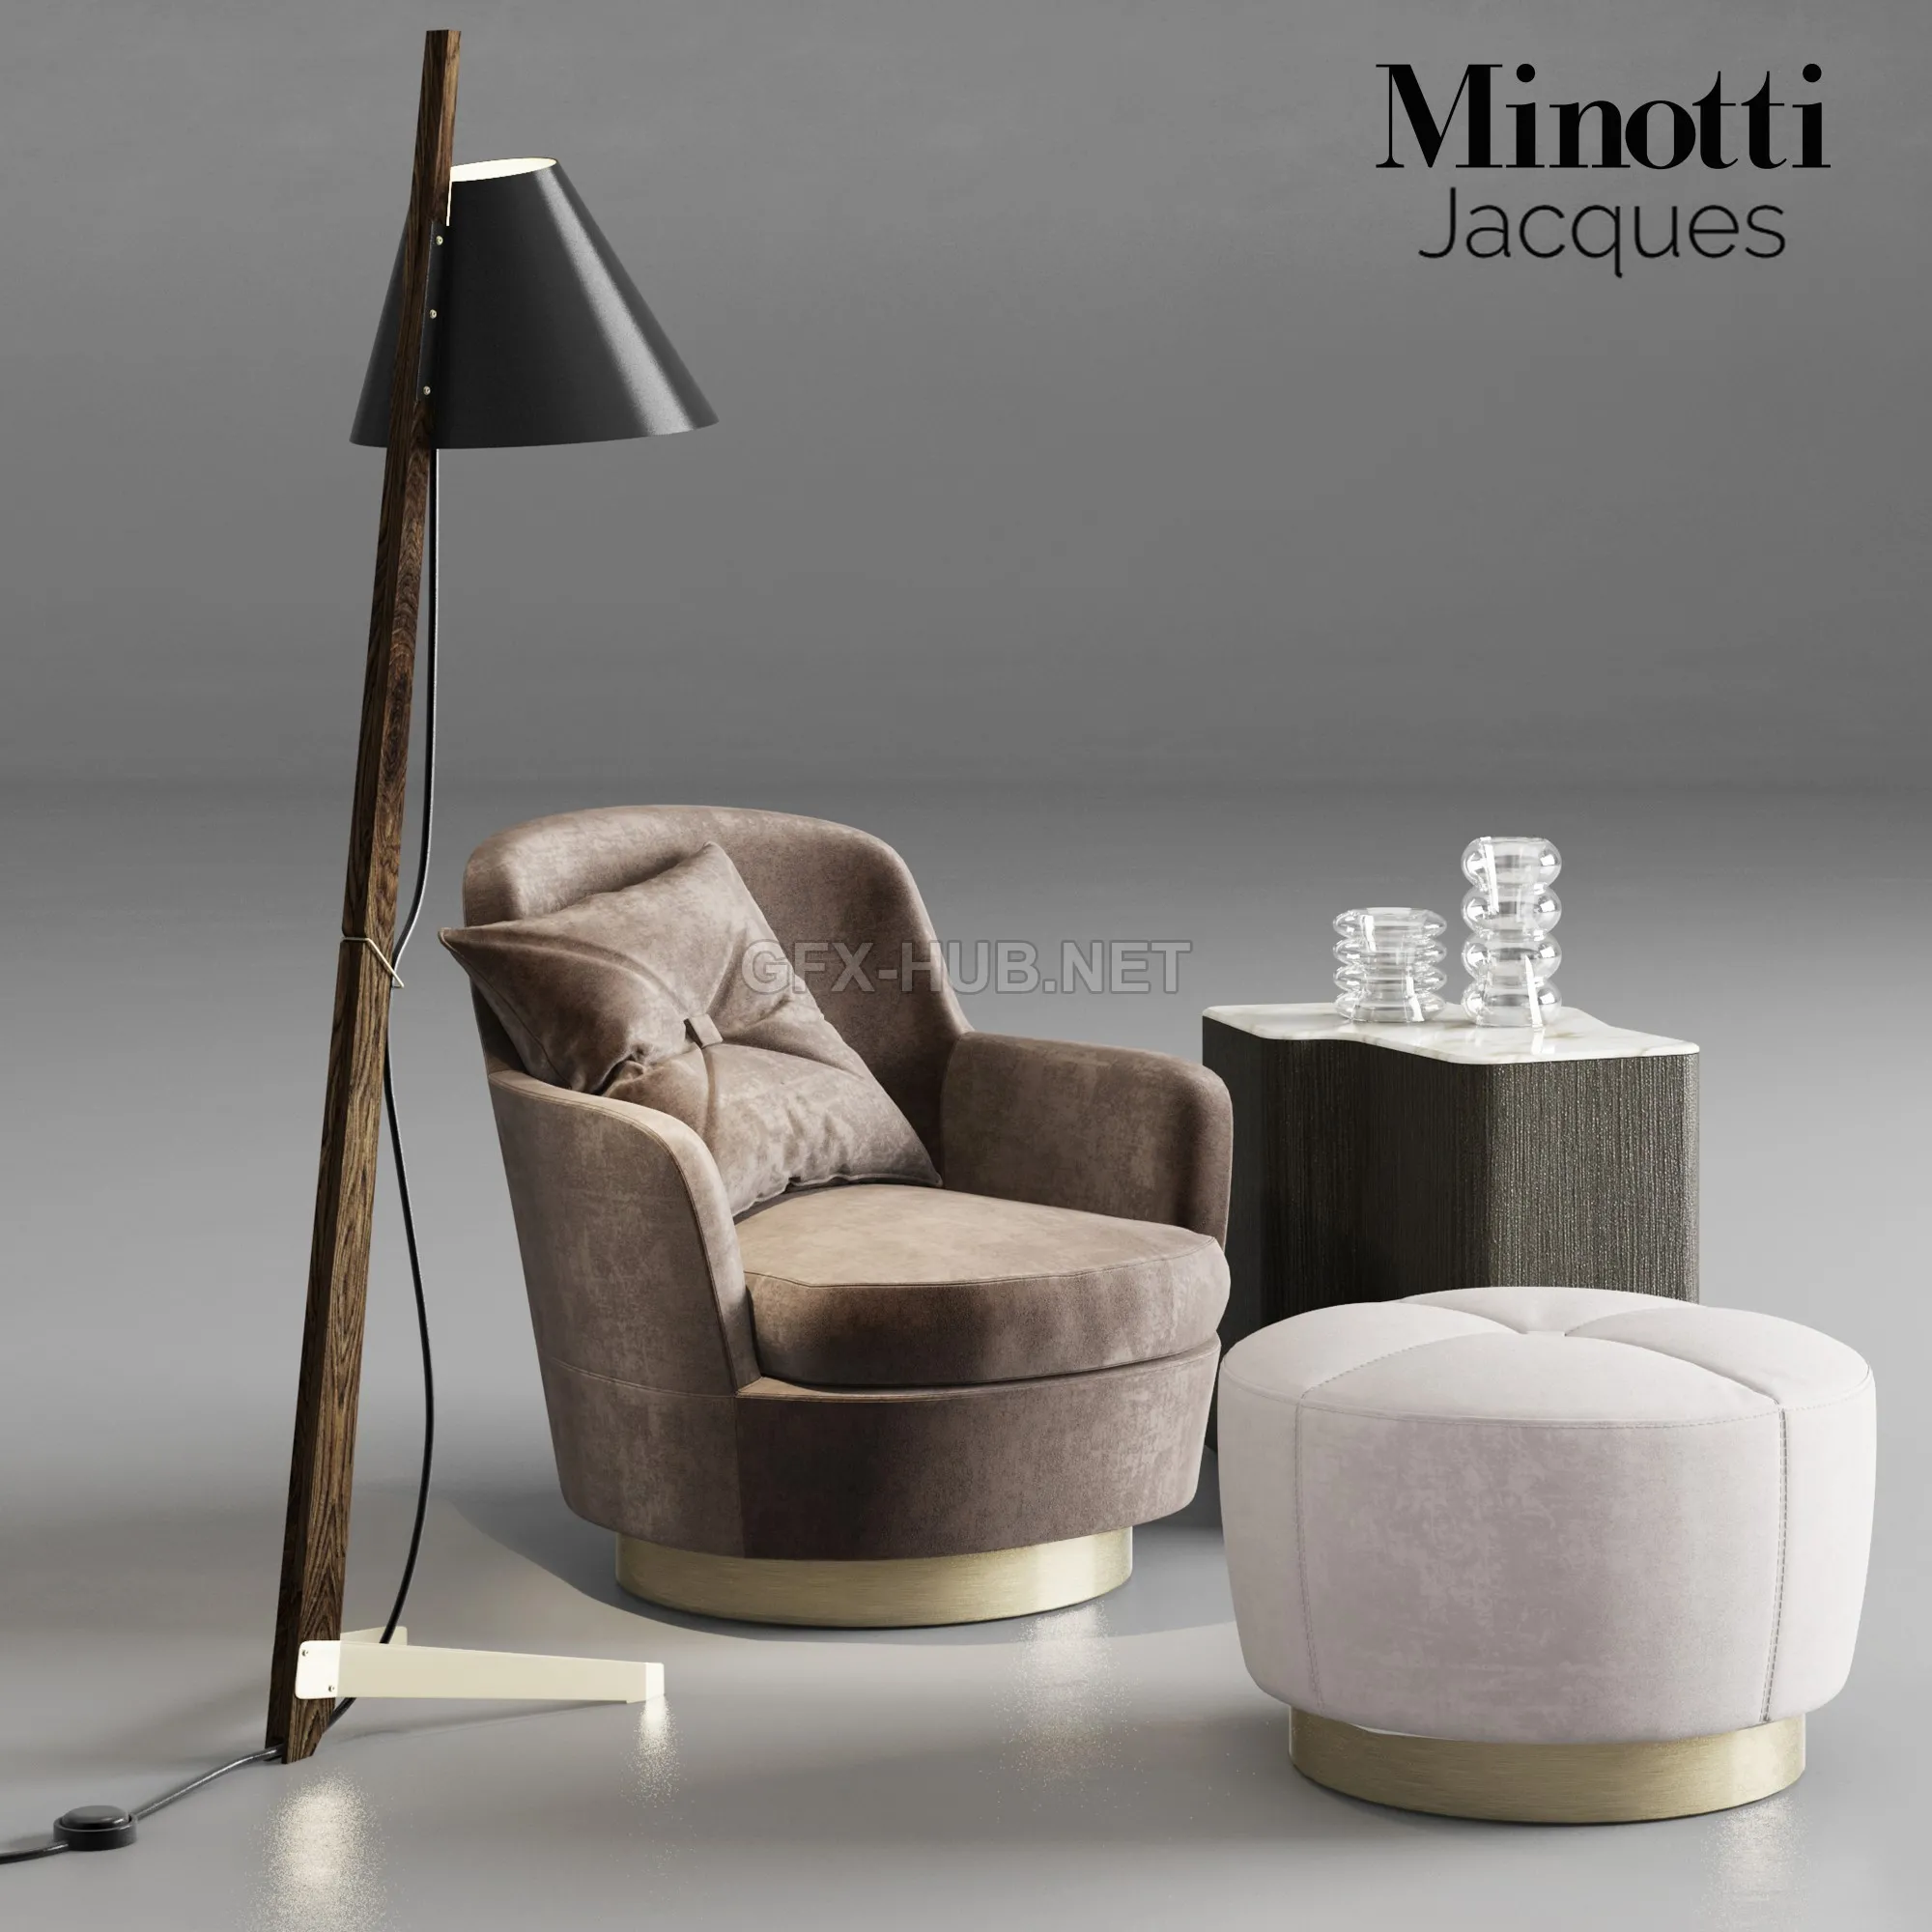 Minotti Jaques armchair with pouf and lamp – 220267